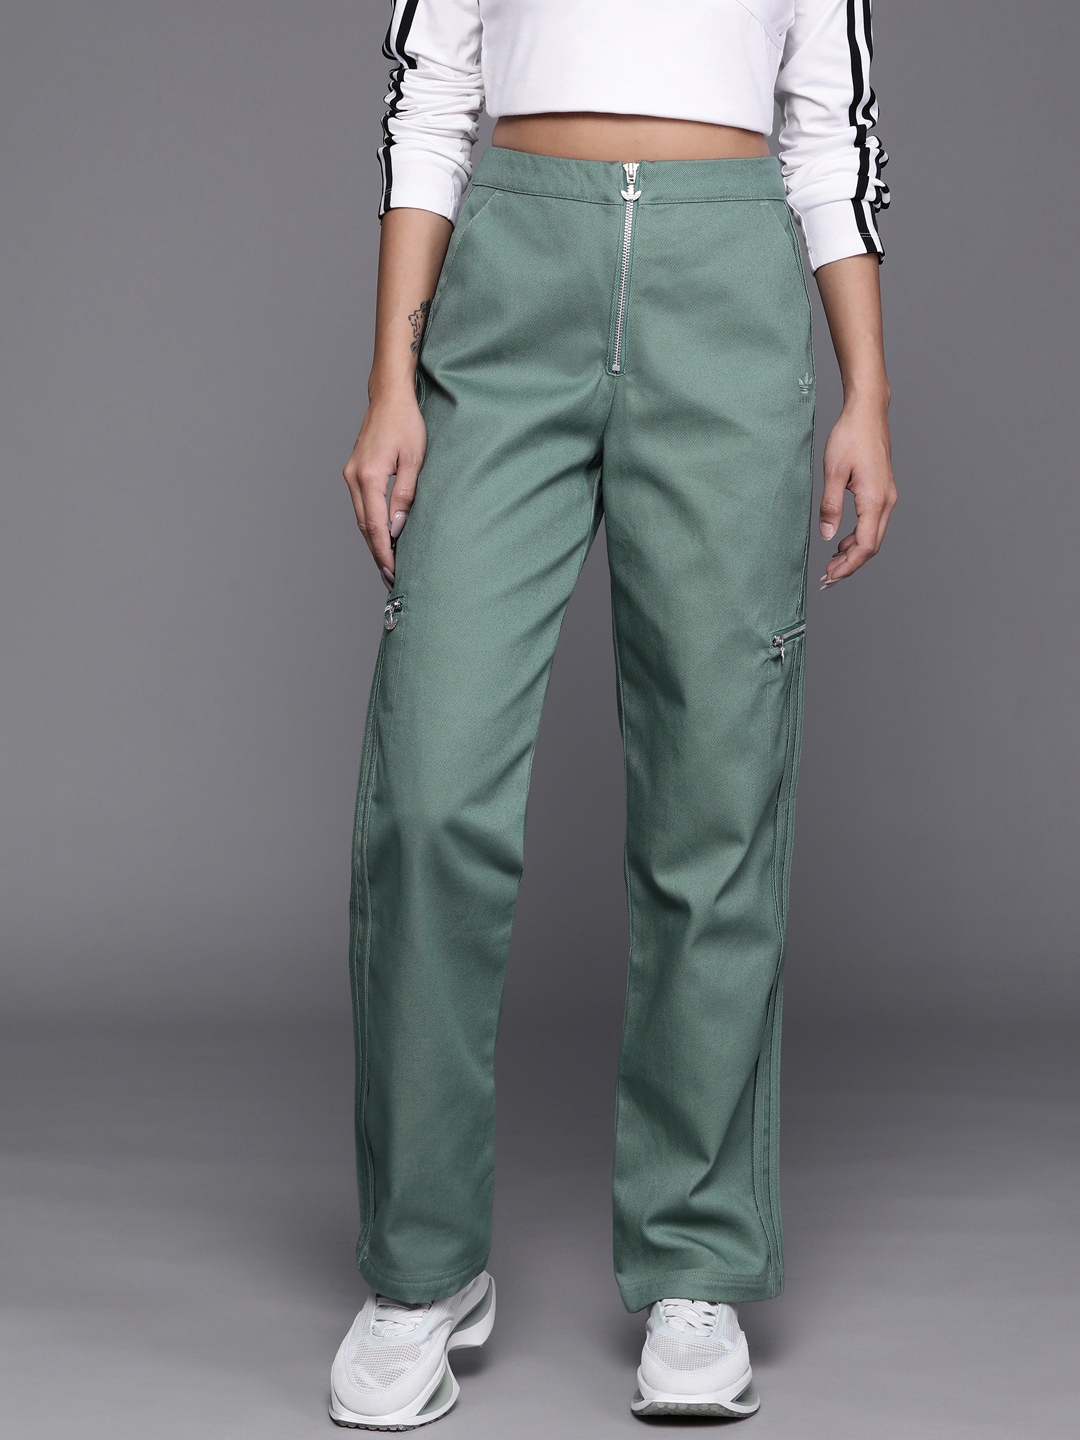 ADIDAS Originals Women Green Solid Sustainable Track Pants Price in India